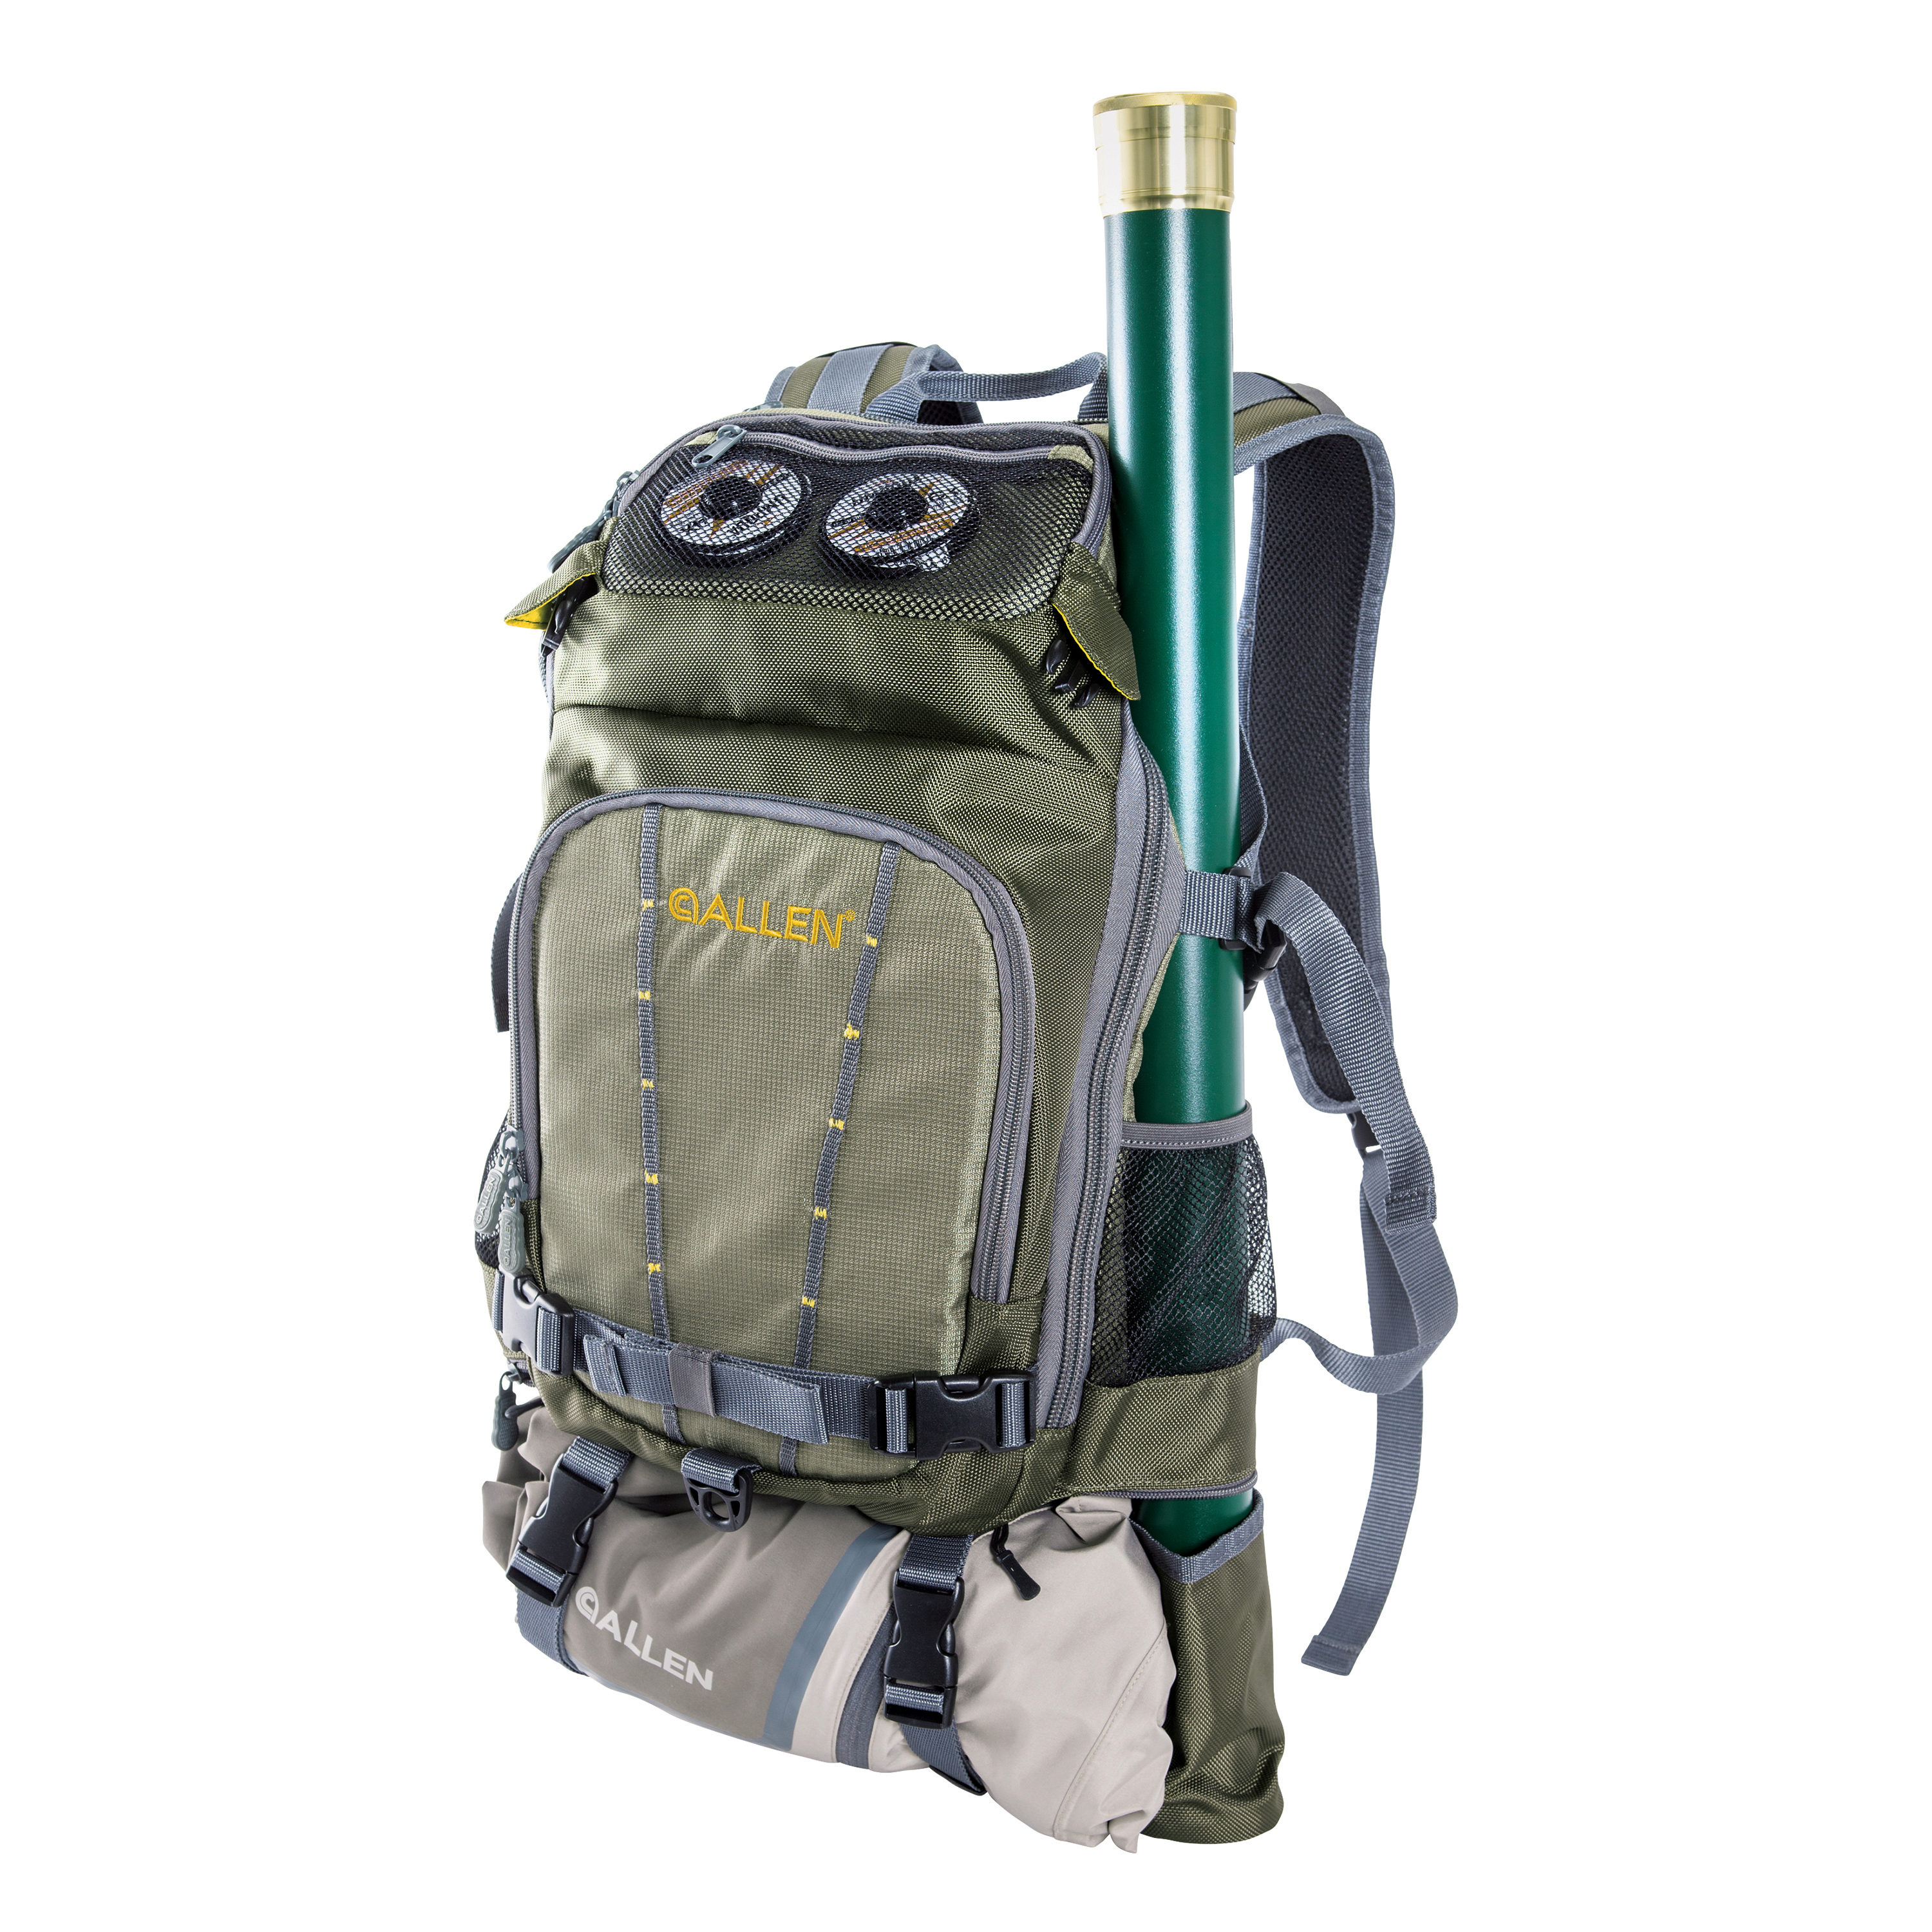 Allen Company Gunnison Fishing Backpack - Green, Convertible Daypack to  Sling Pack, Multiple Pockets for Rod Tubes and Water Bottles in the Fishing  Gear & Apparel department at